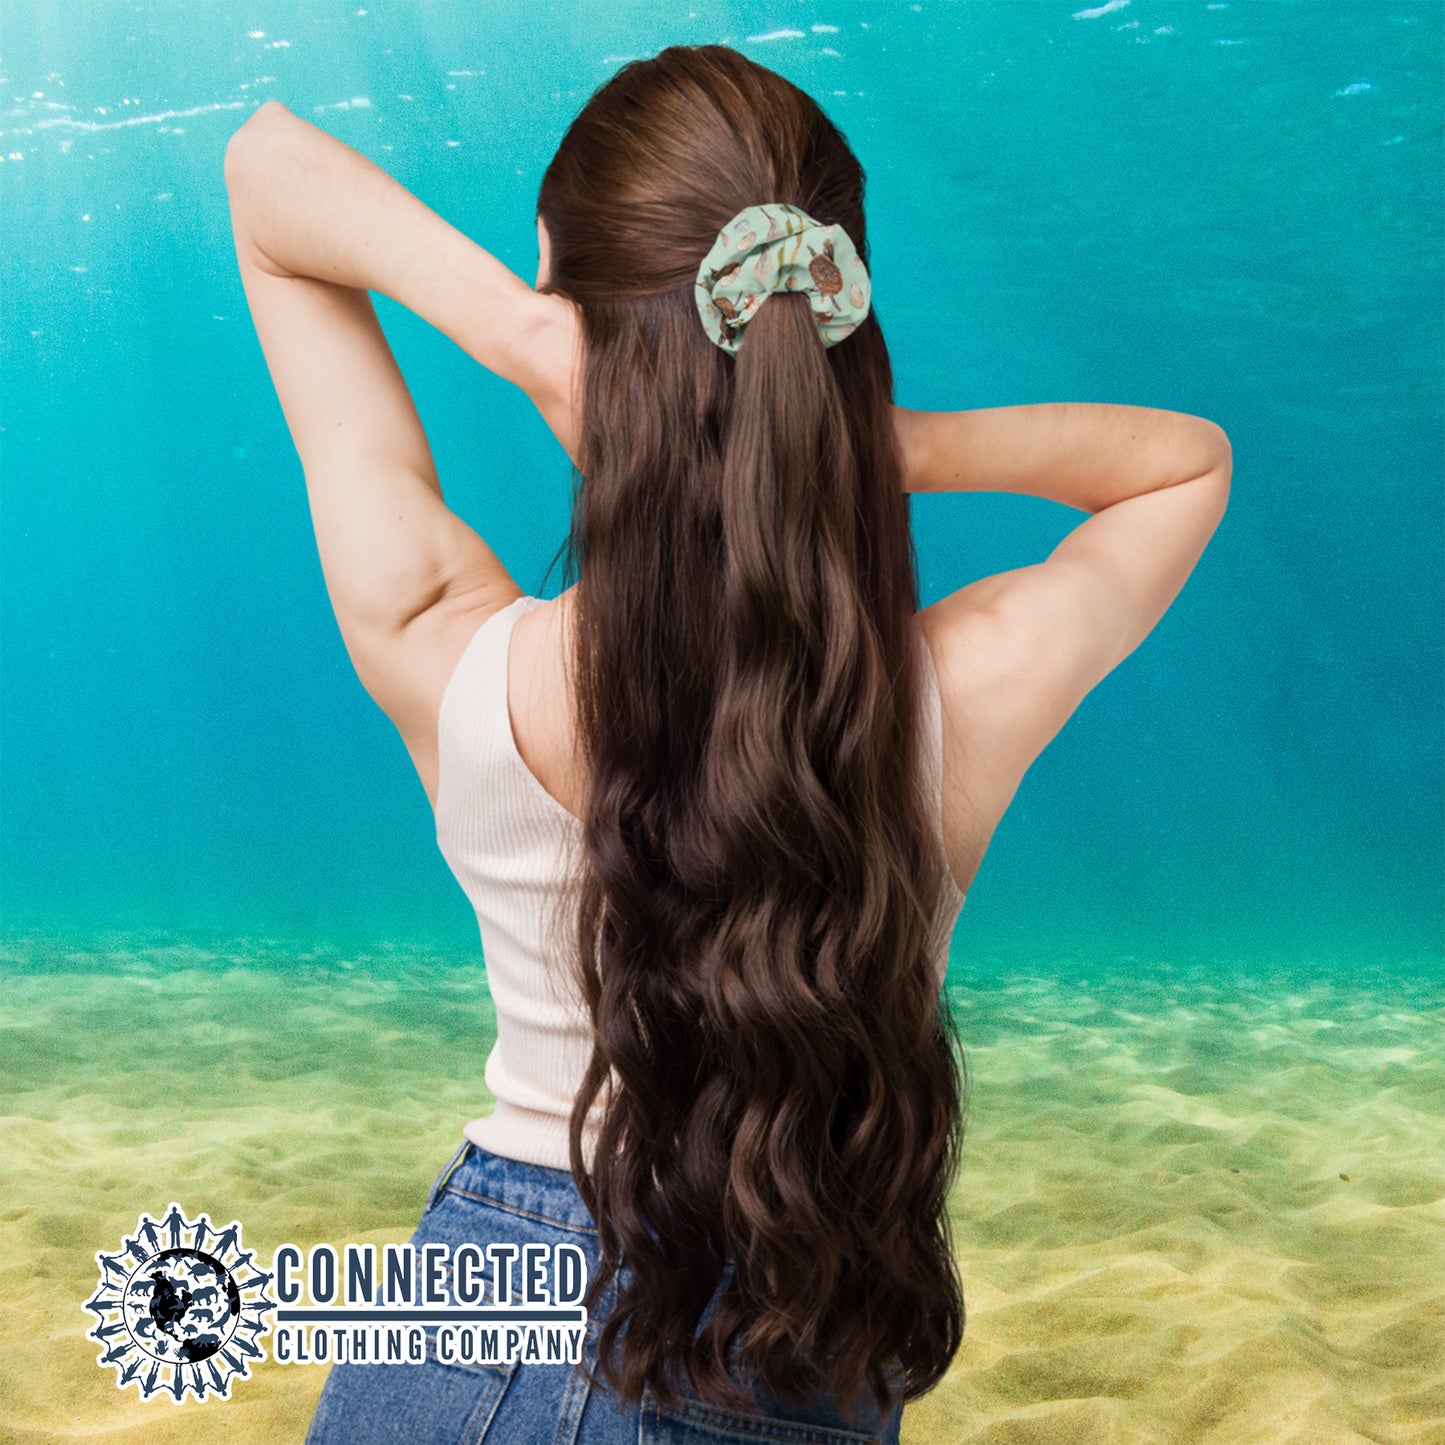 Sea Turtle Scrunchie In Women's Hair - sweetsherriloudesigns - Ethical & Sustainable Apparel - 10% donated to save the sea turtles